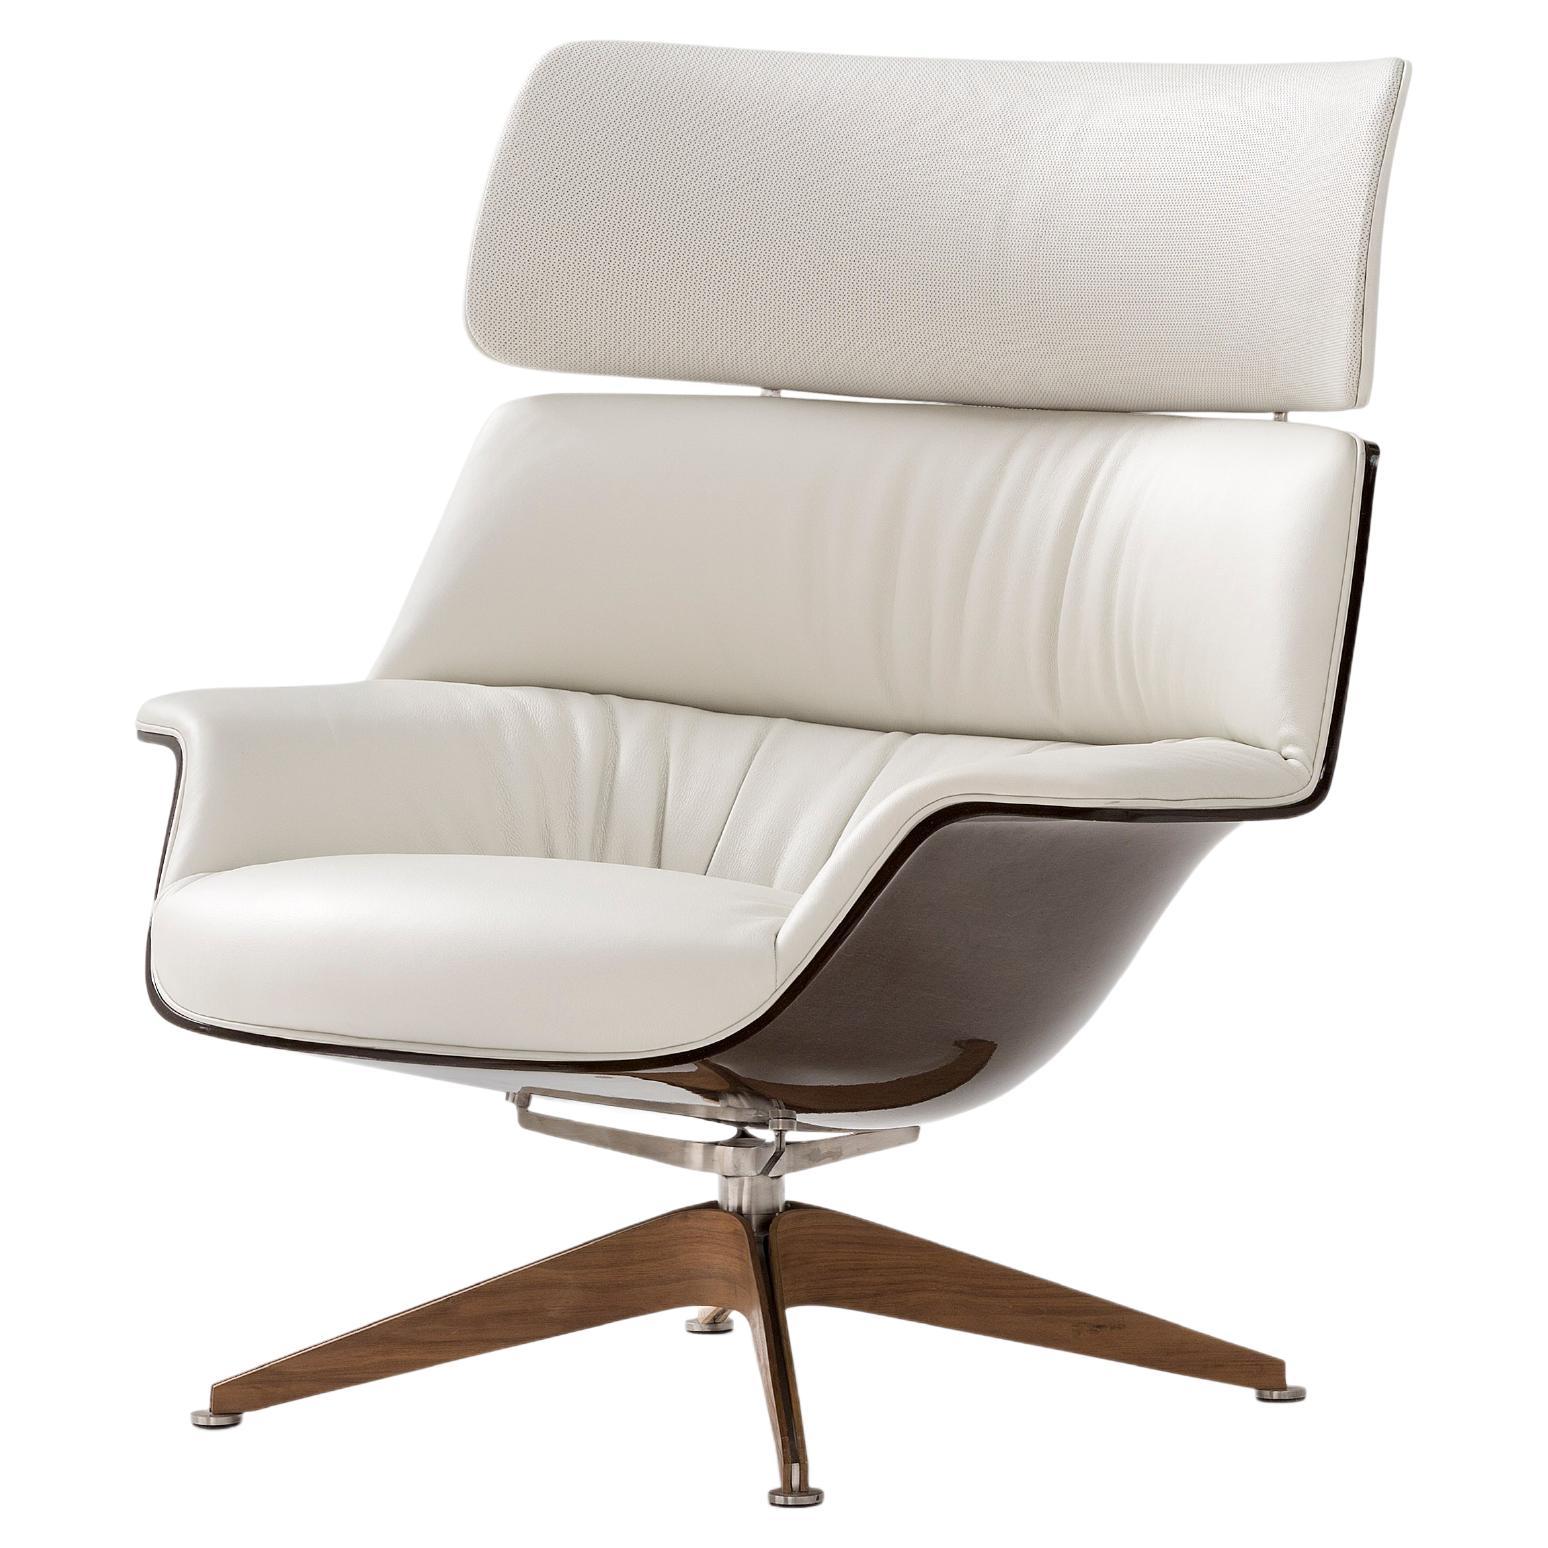 Saint Luc 'Coach 2' Lounge Chair in White Leather with Headrest by J.M. Massaud For Sale